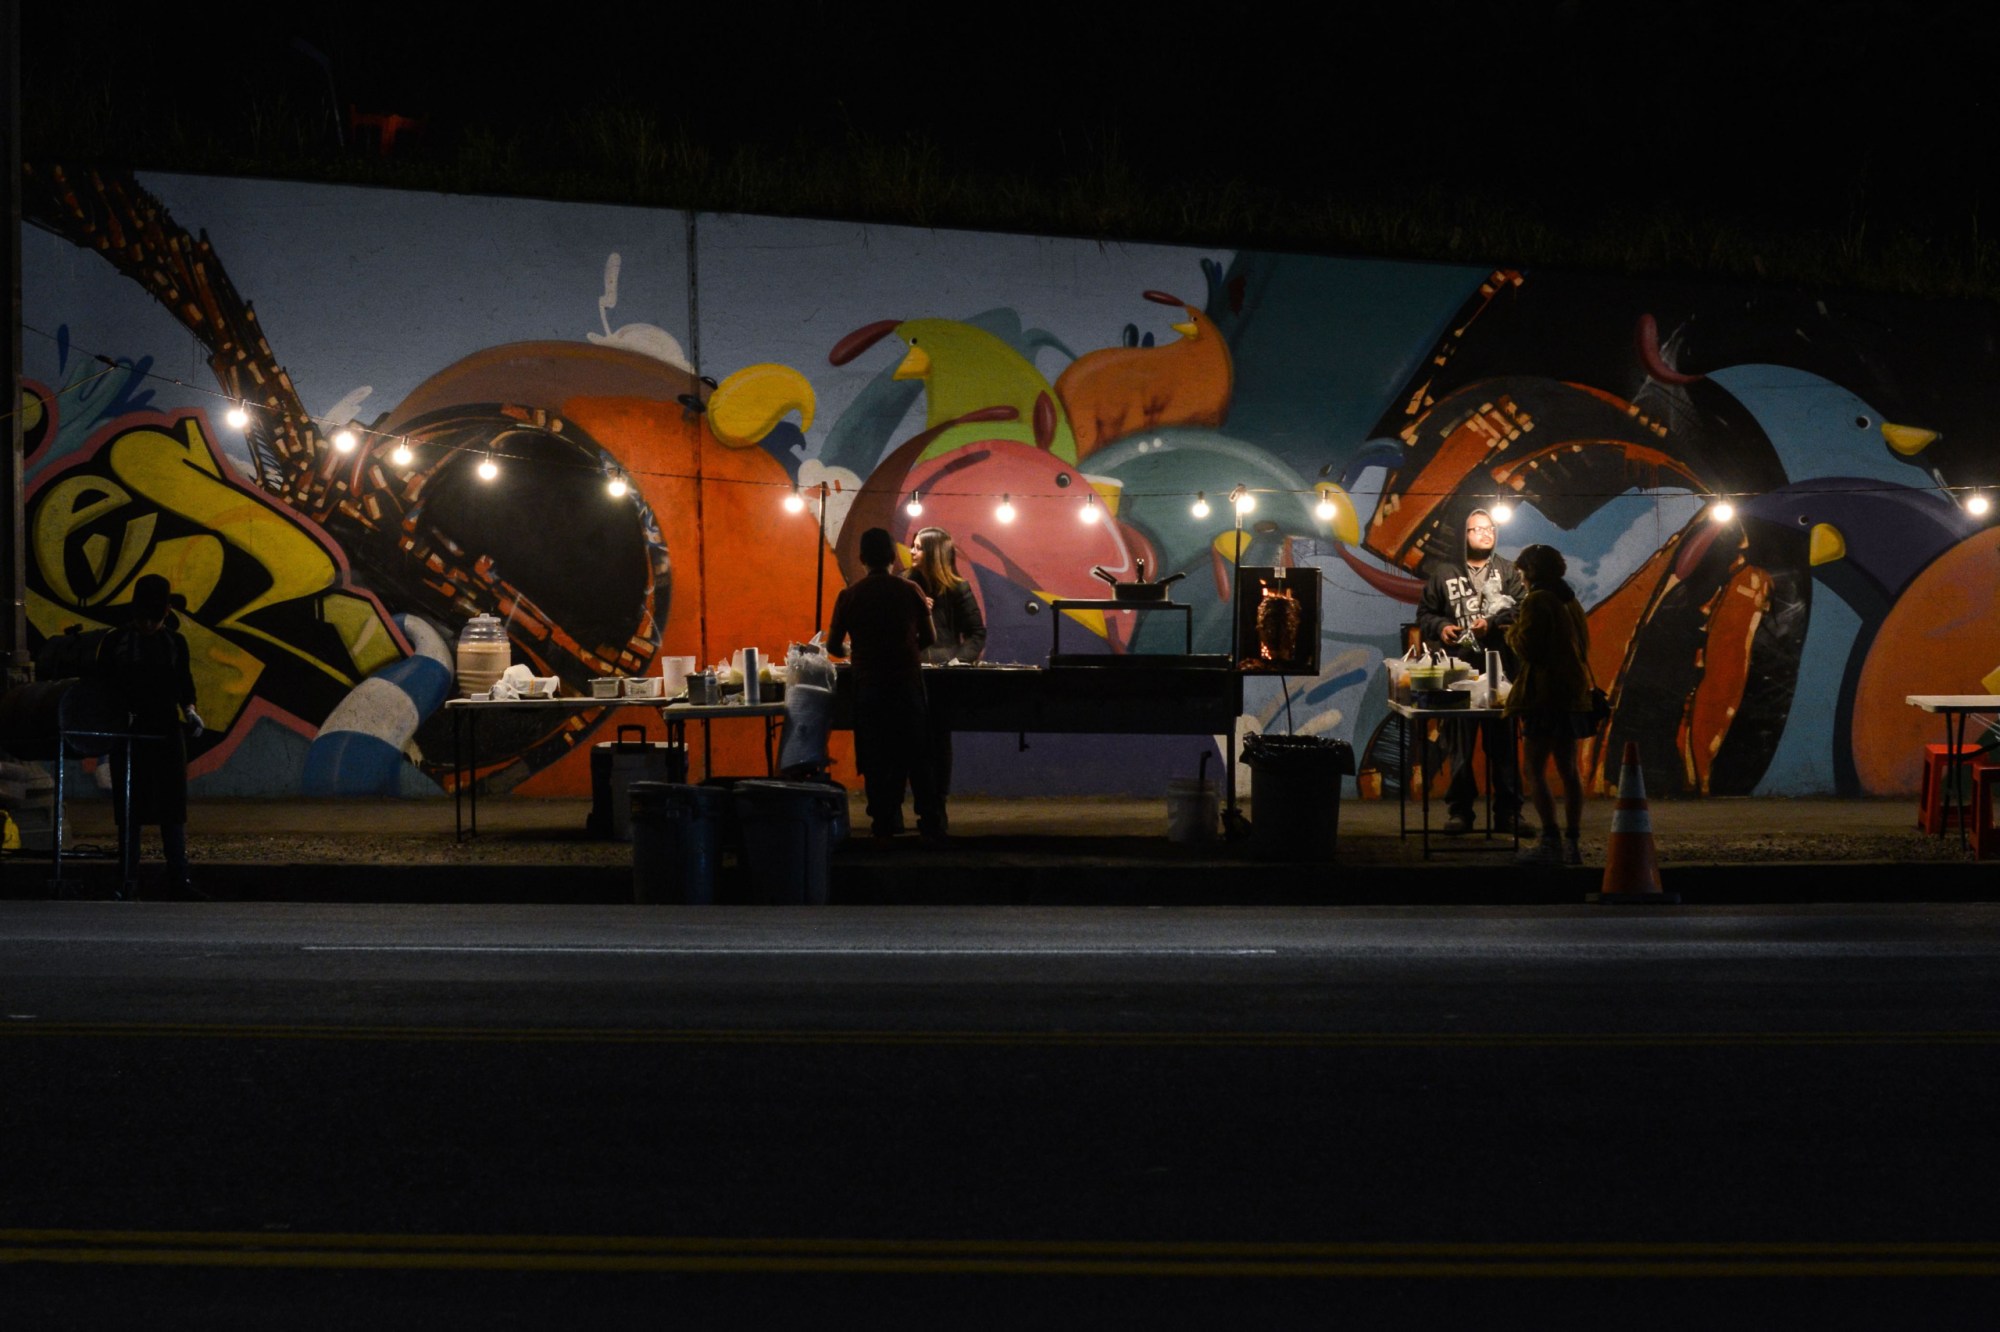 A California street vendor serves customers in front of a colorful mural in Los Angeles.